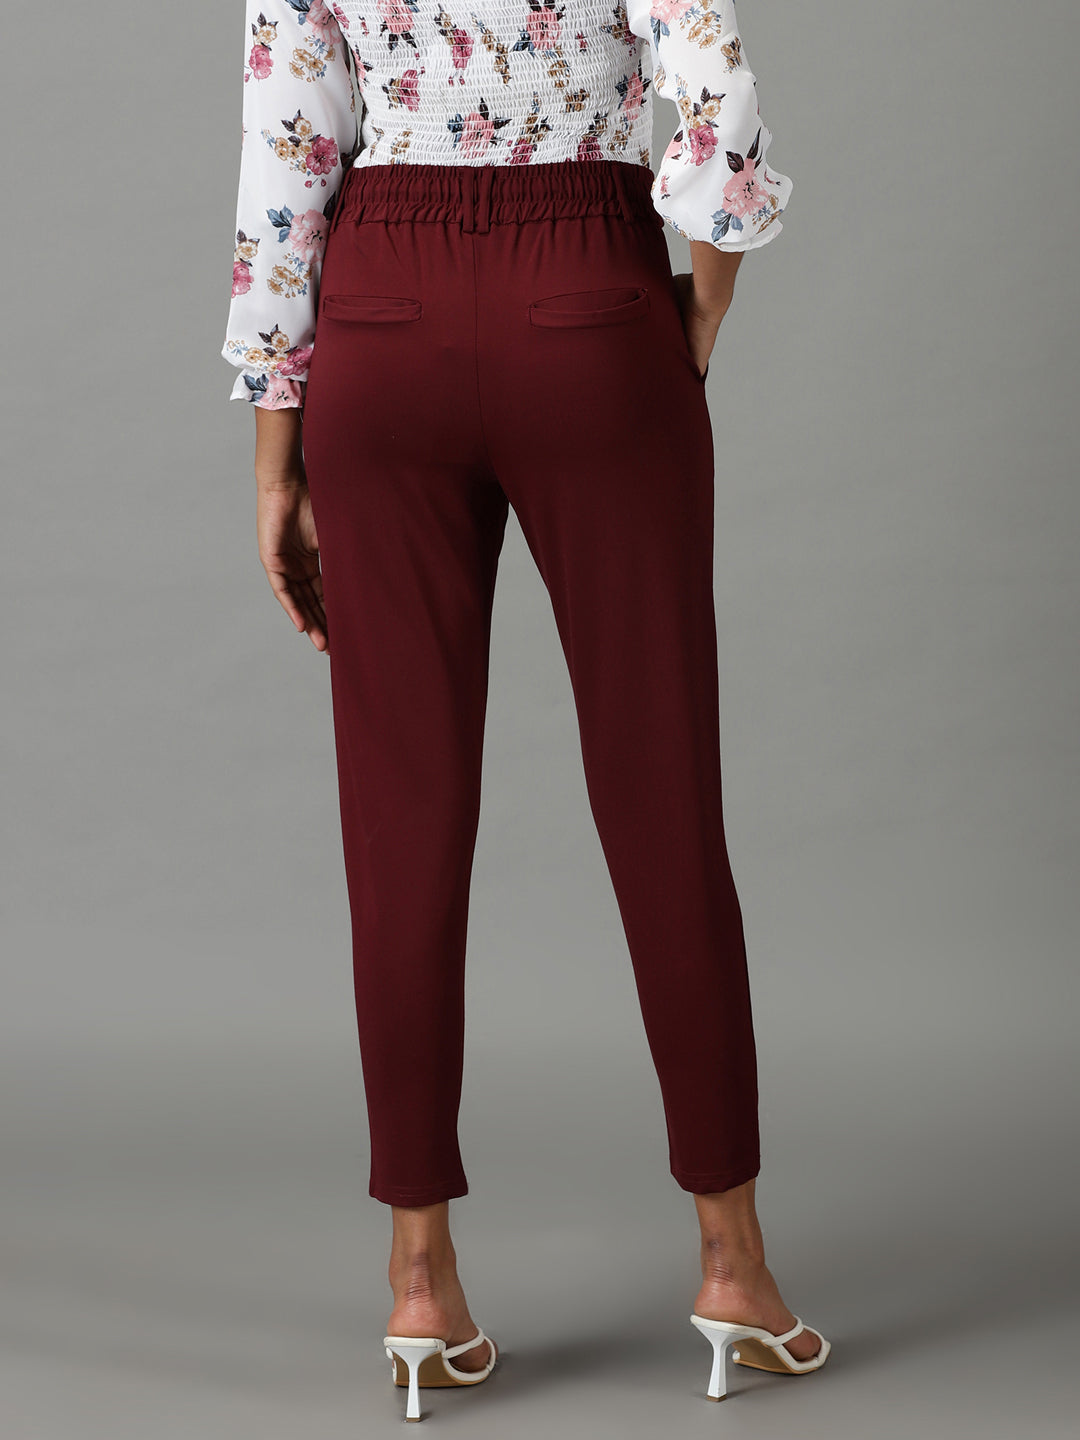 Women's Burgundy Solid Track Pant